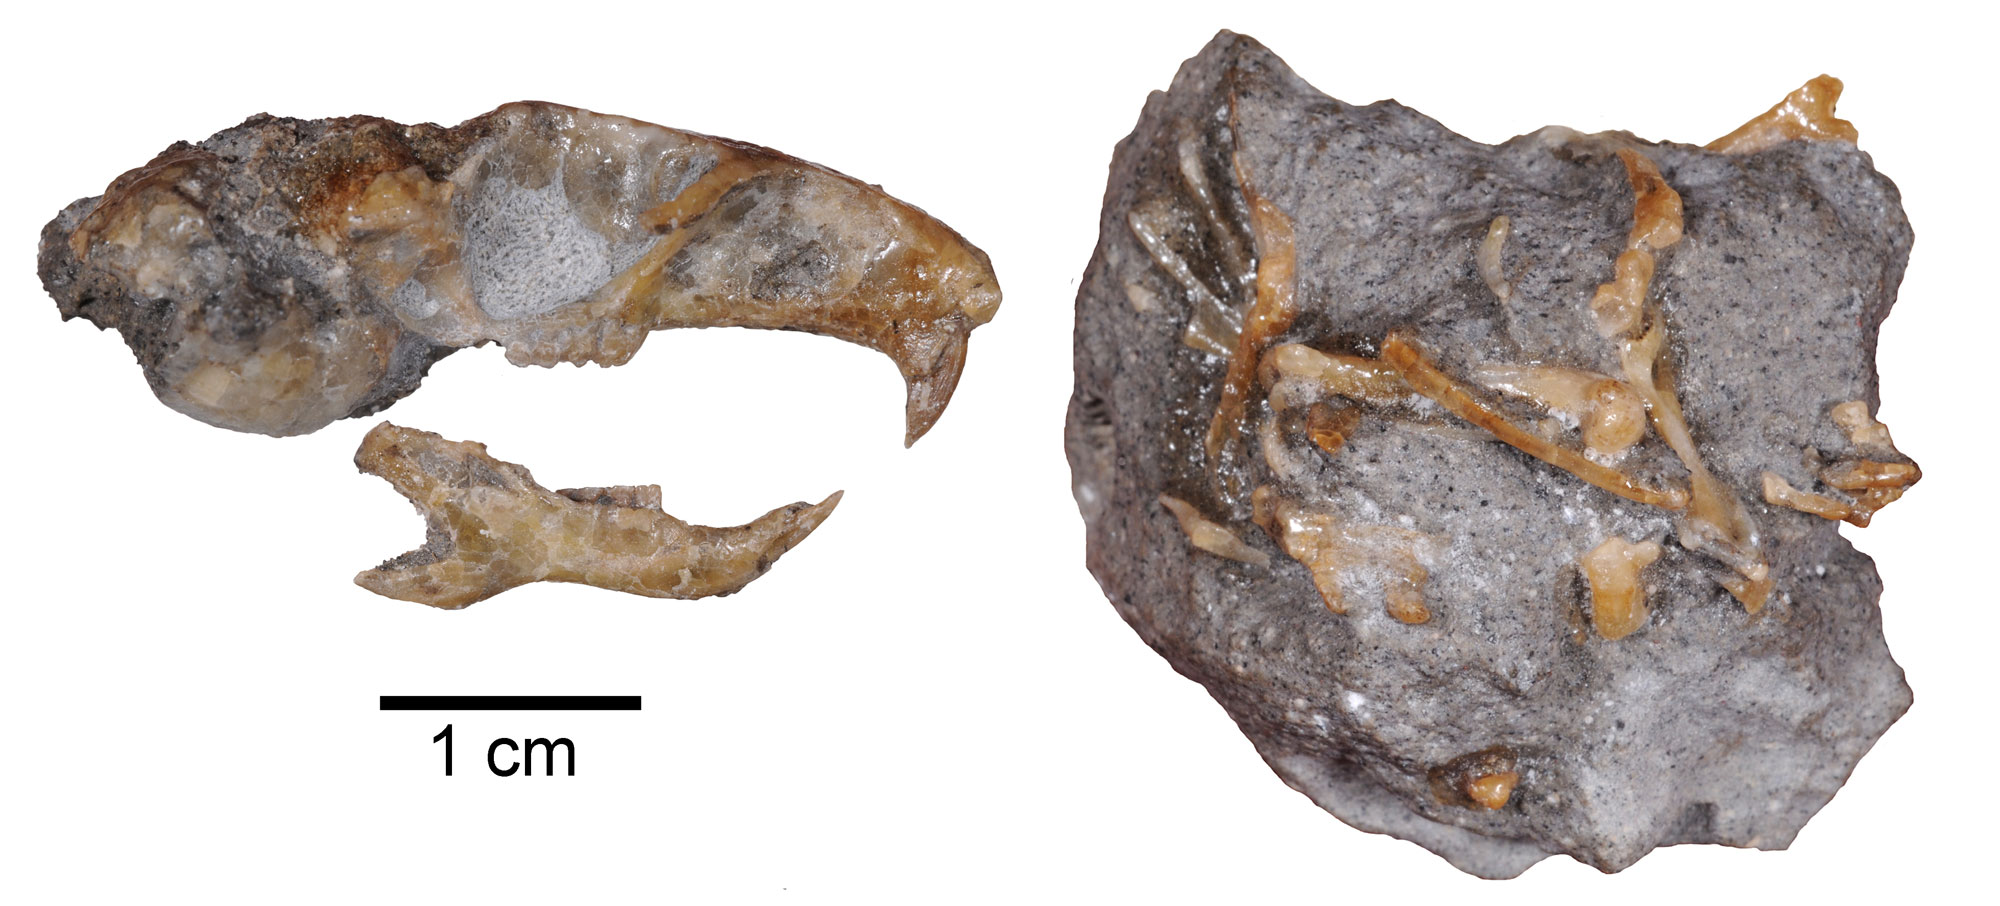 Photographs of fossils of a birch mouse from the Oligocene of Oregon. Left: Skull shown in side view. Right: Unidentified bones embedded in a rock.